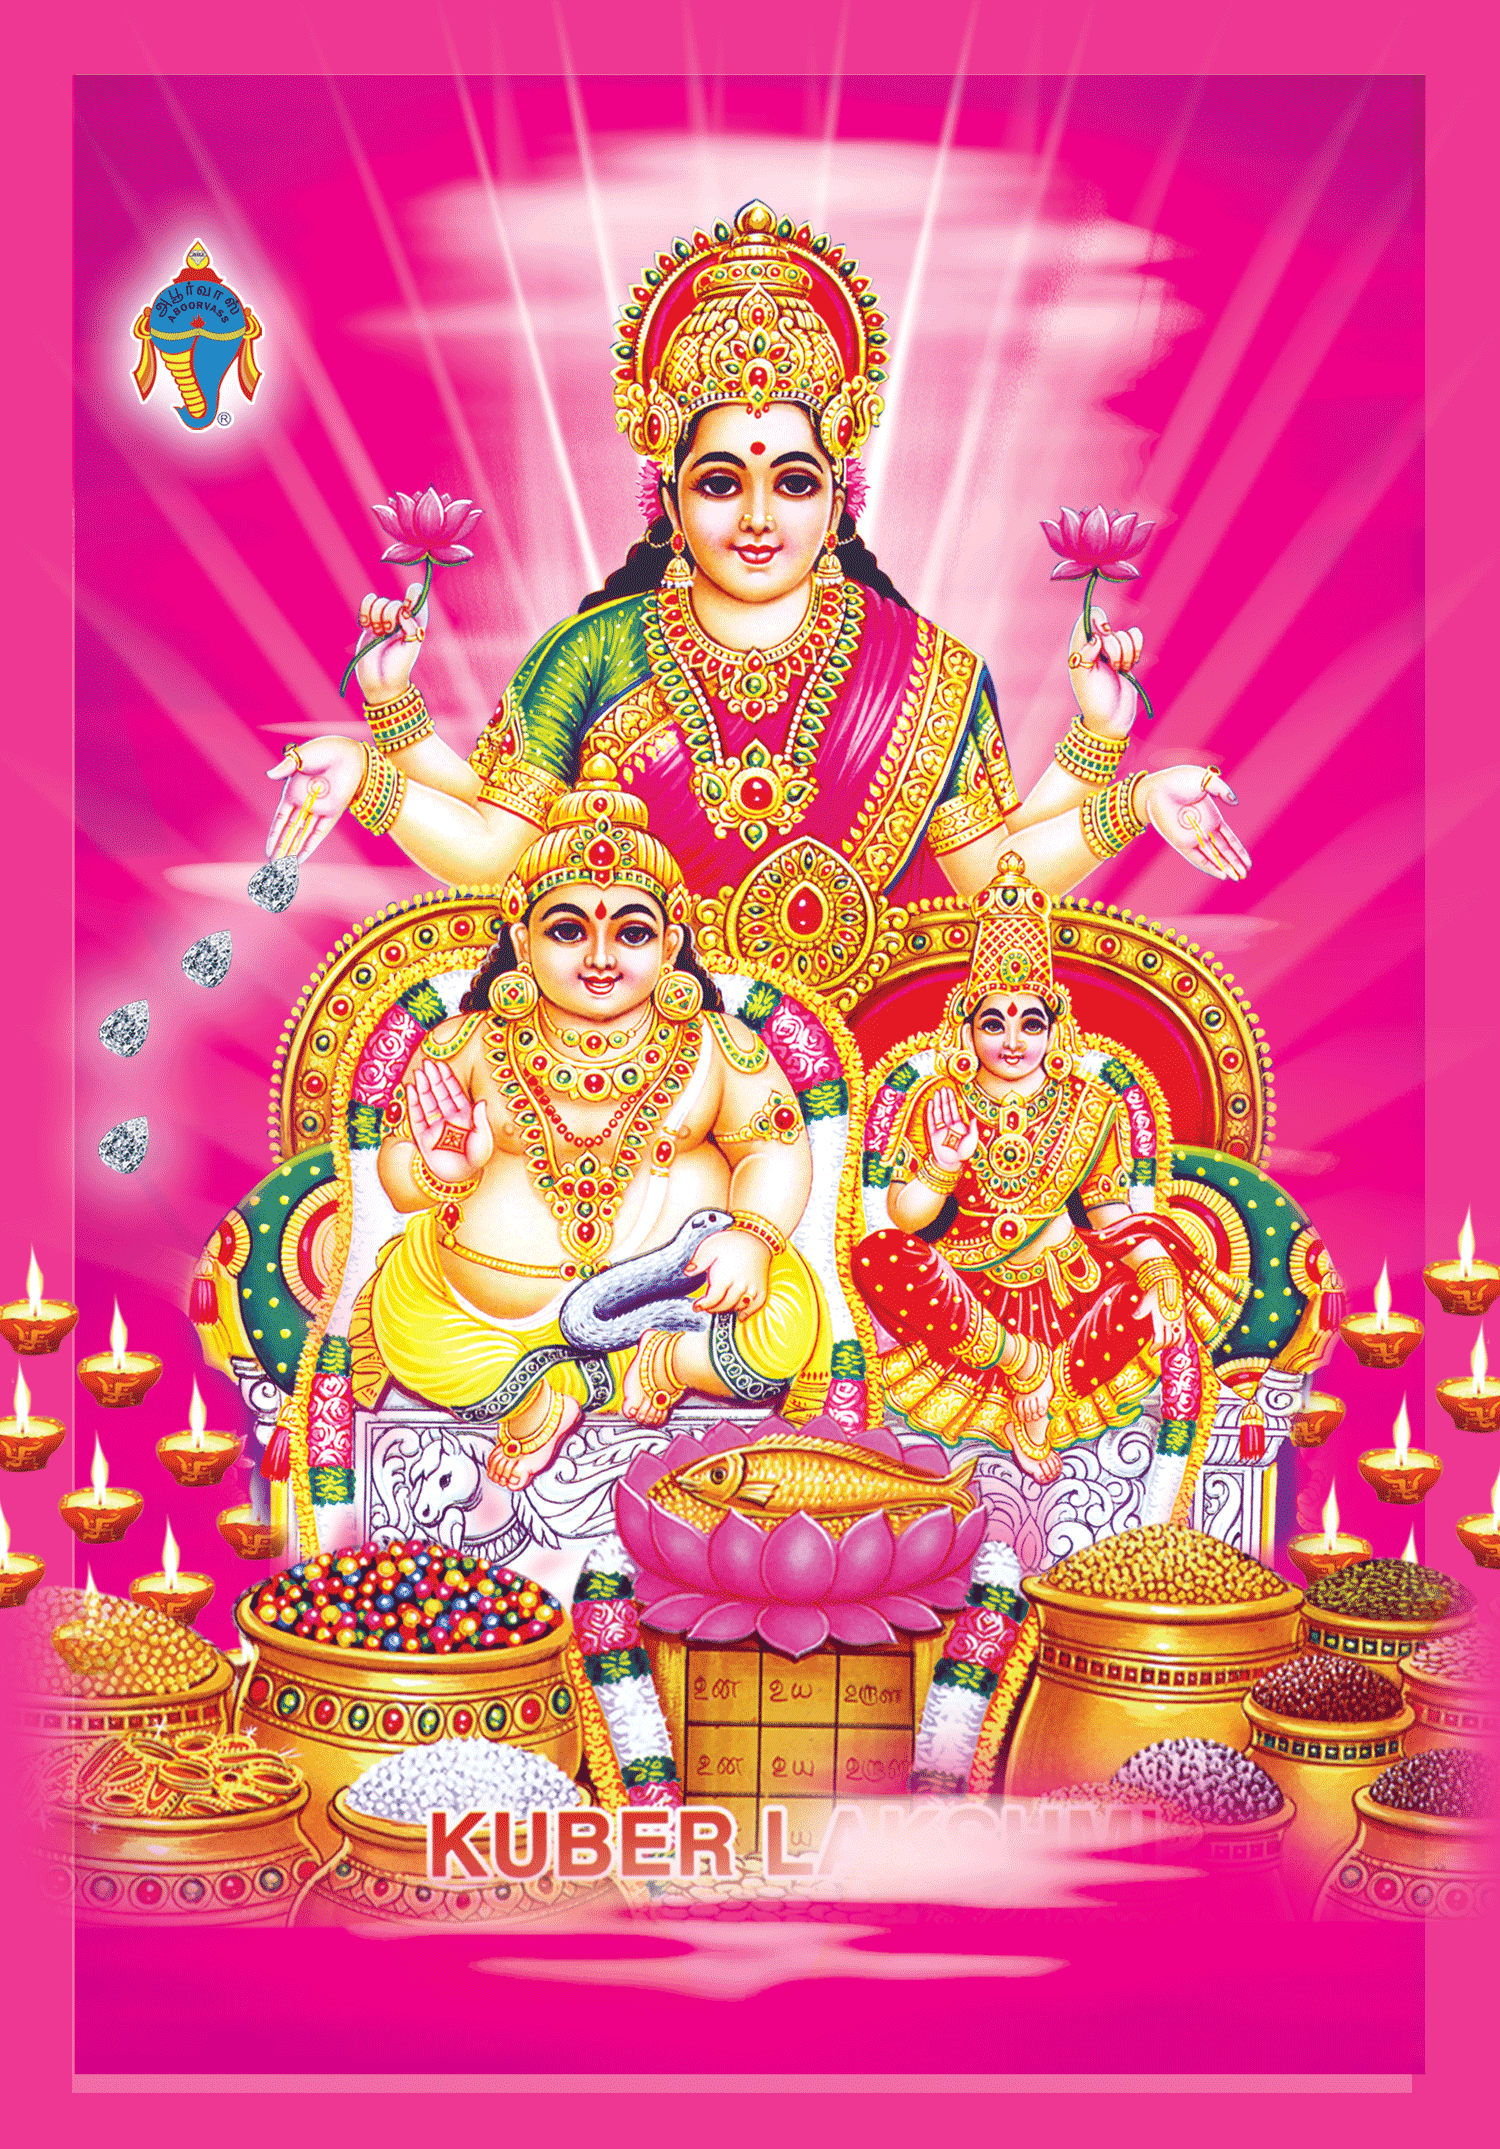 lakshmi with kuberan Pictures, Photos, Images, Wallpapers ...